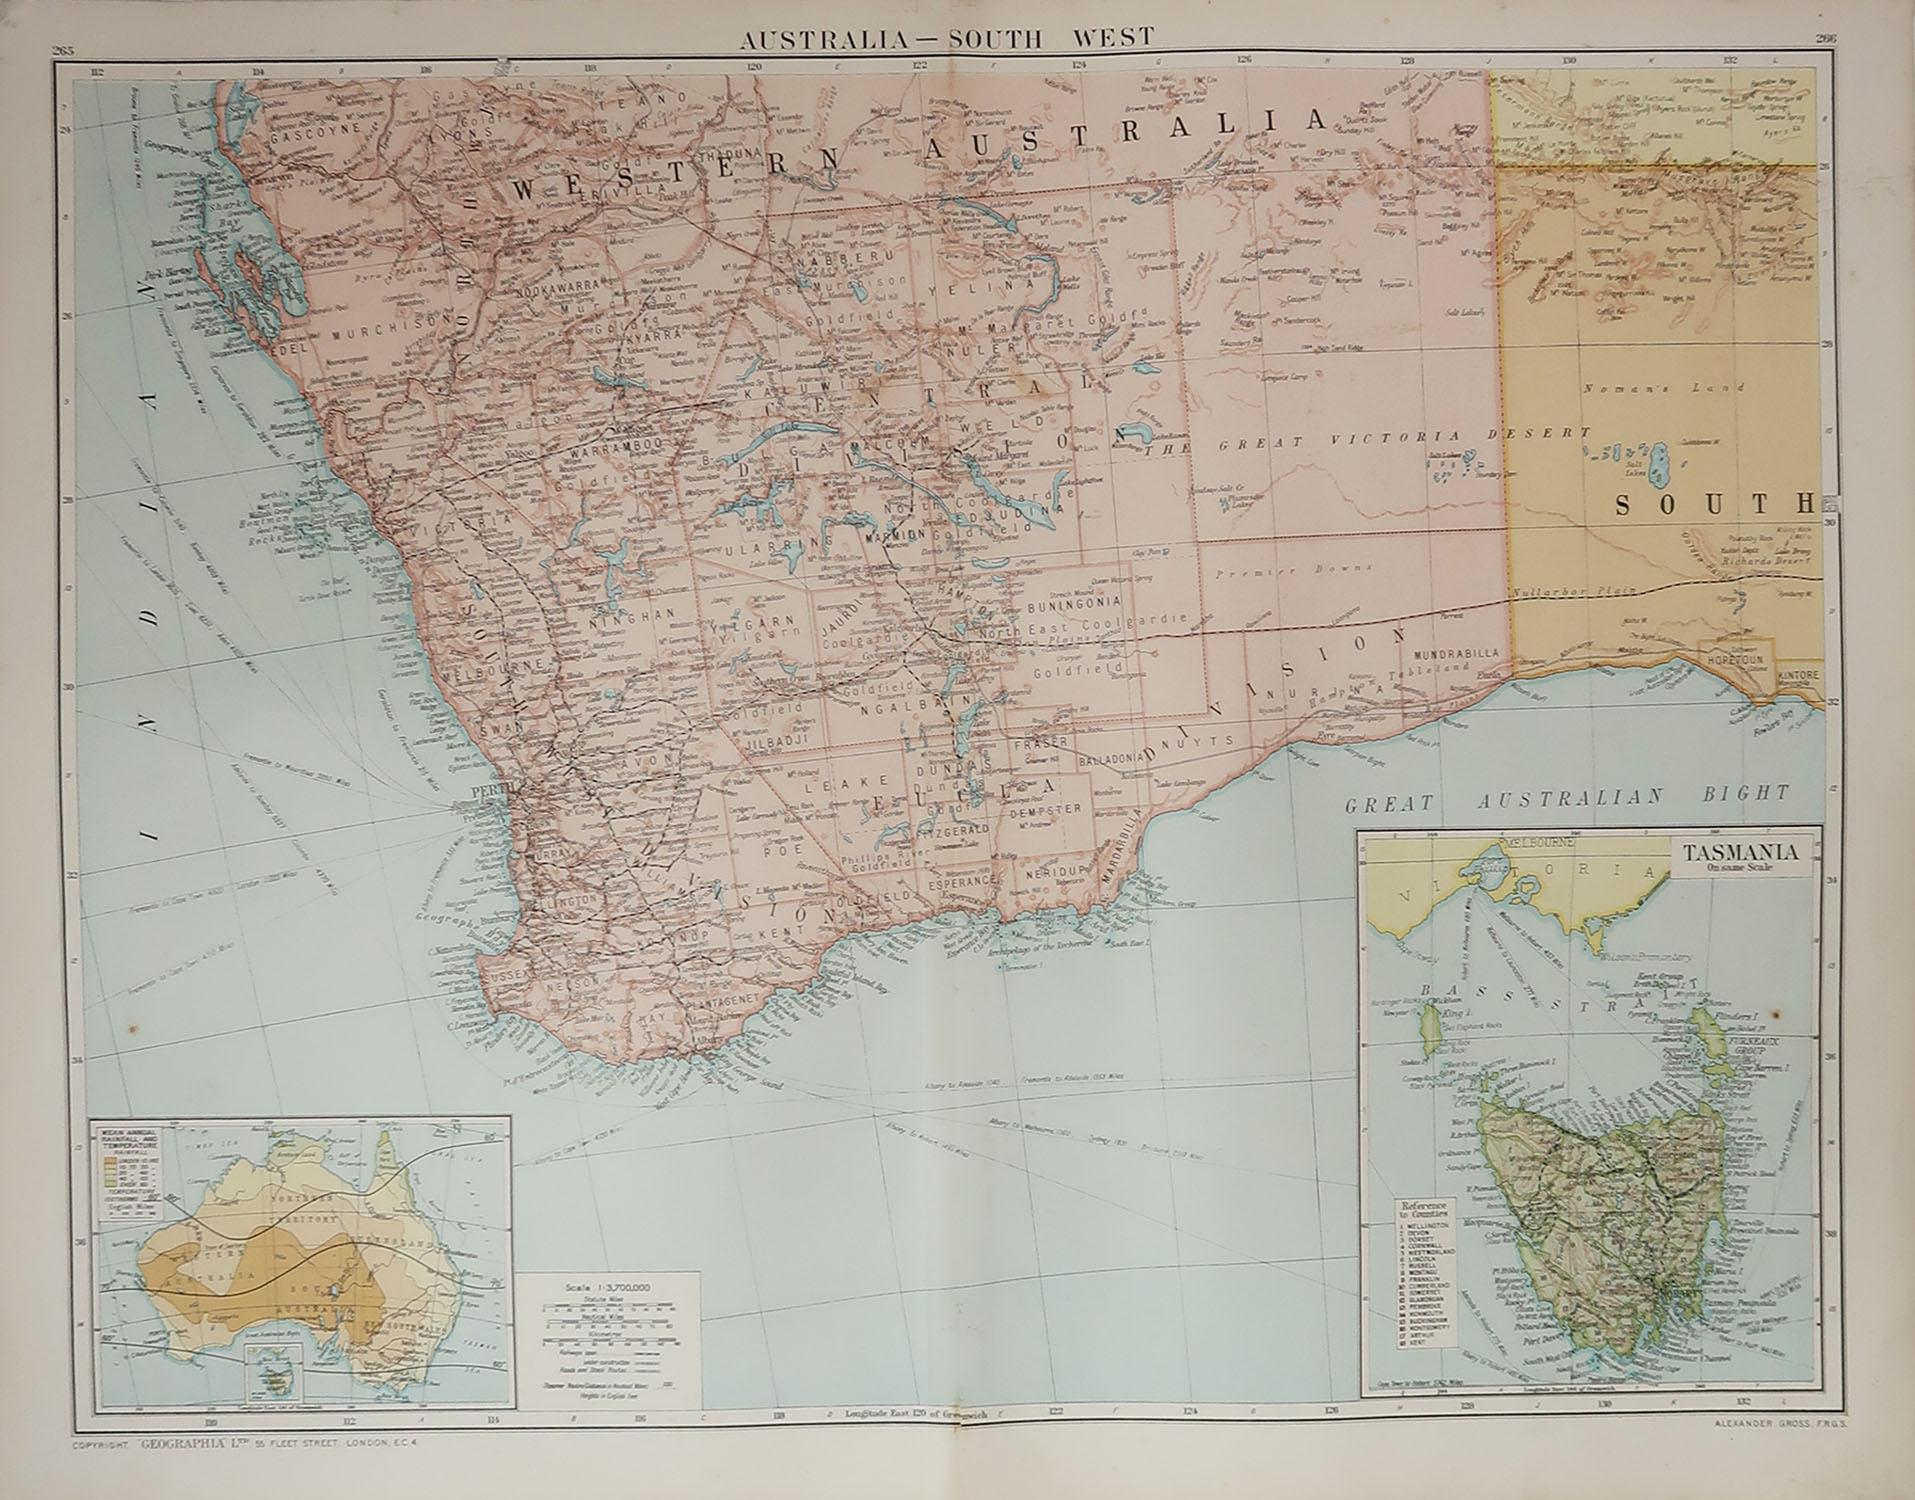 Great map of Western Australia with a vignette of Tasmania

Original color. 

Good condition 

Published by Alexander Gross

Unframed.








   